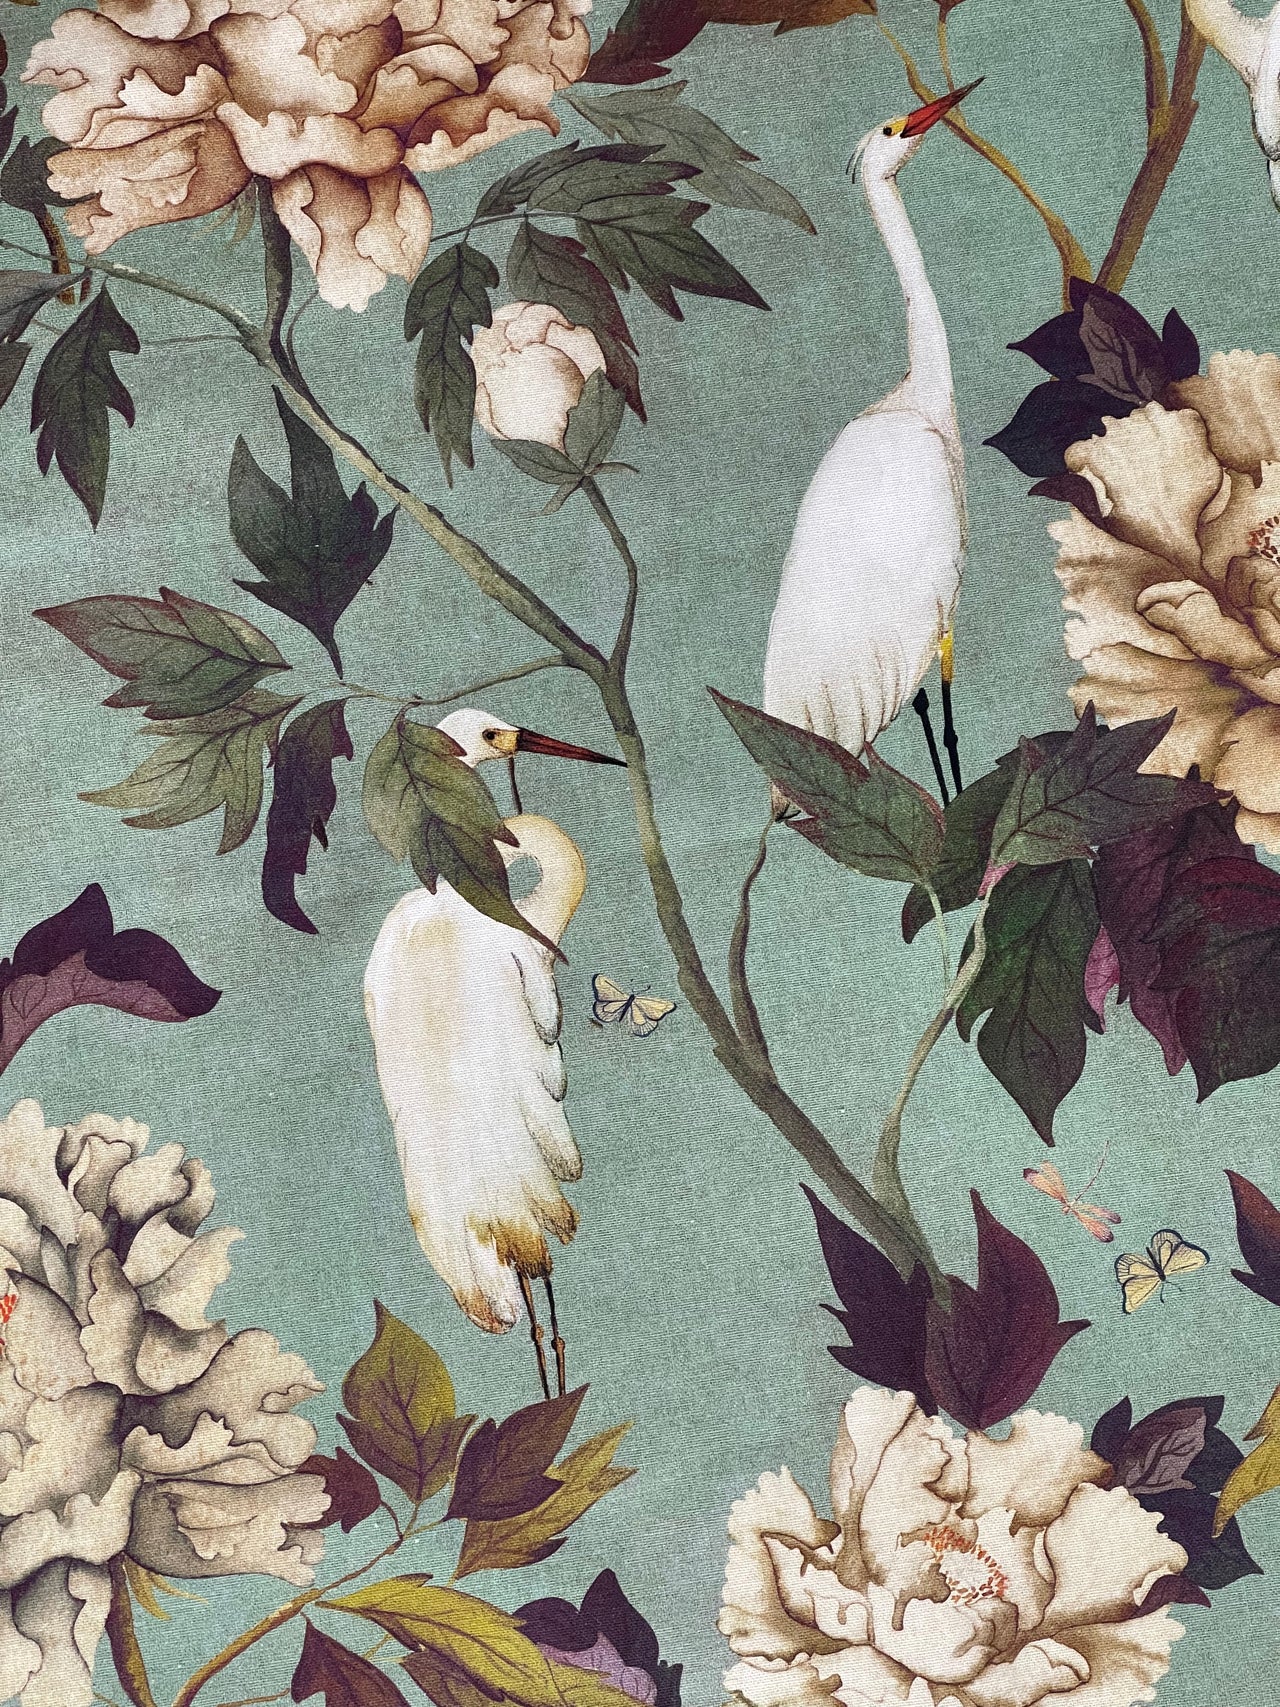 Custom-Made to Measure Roman Blinds - Vintage Zen Pattern on Green Cotton Fabric with Botanical Print Featuring Birds, Flowers, and Insects